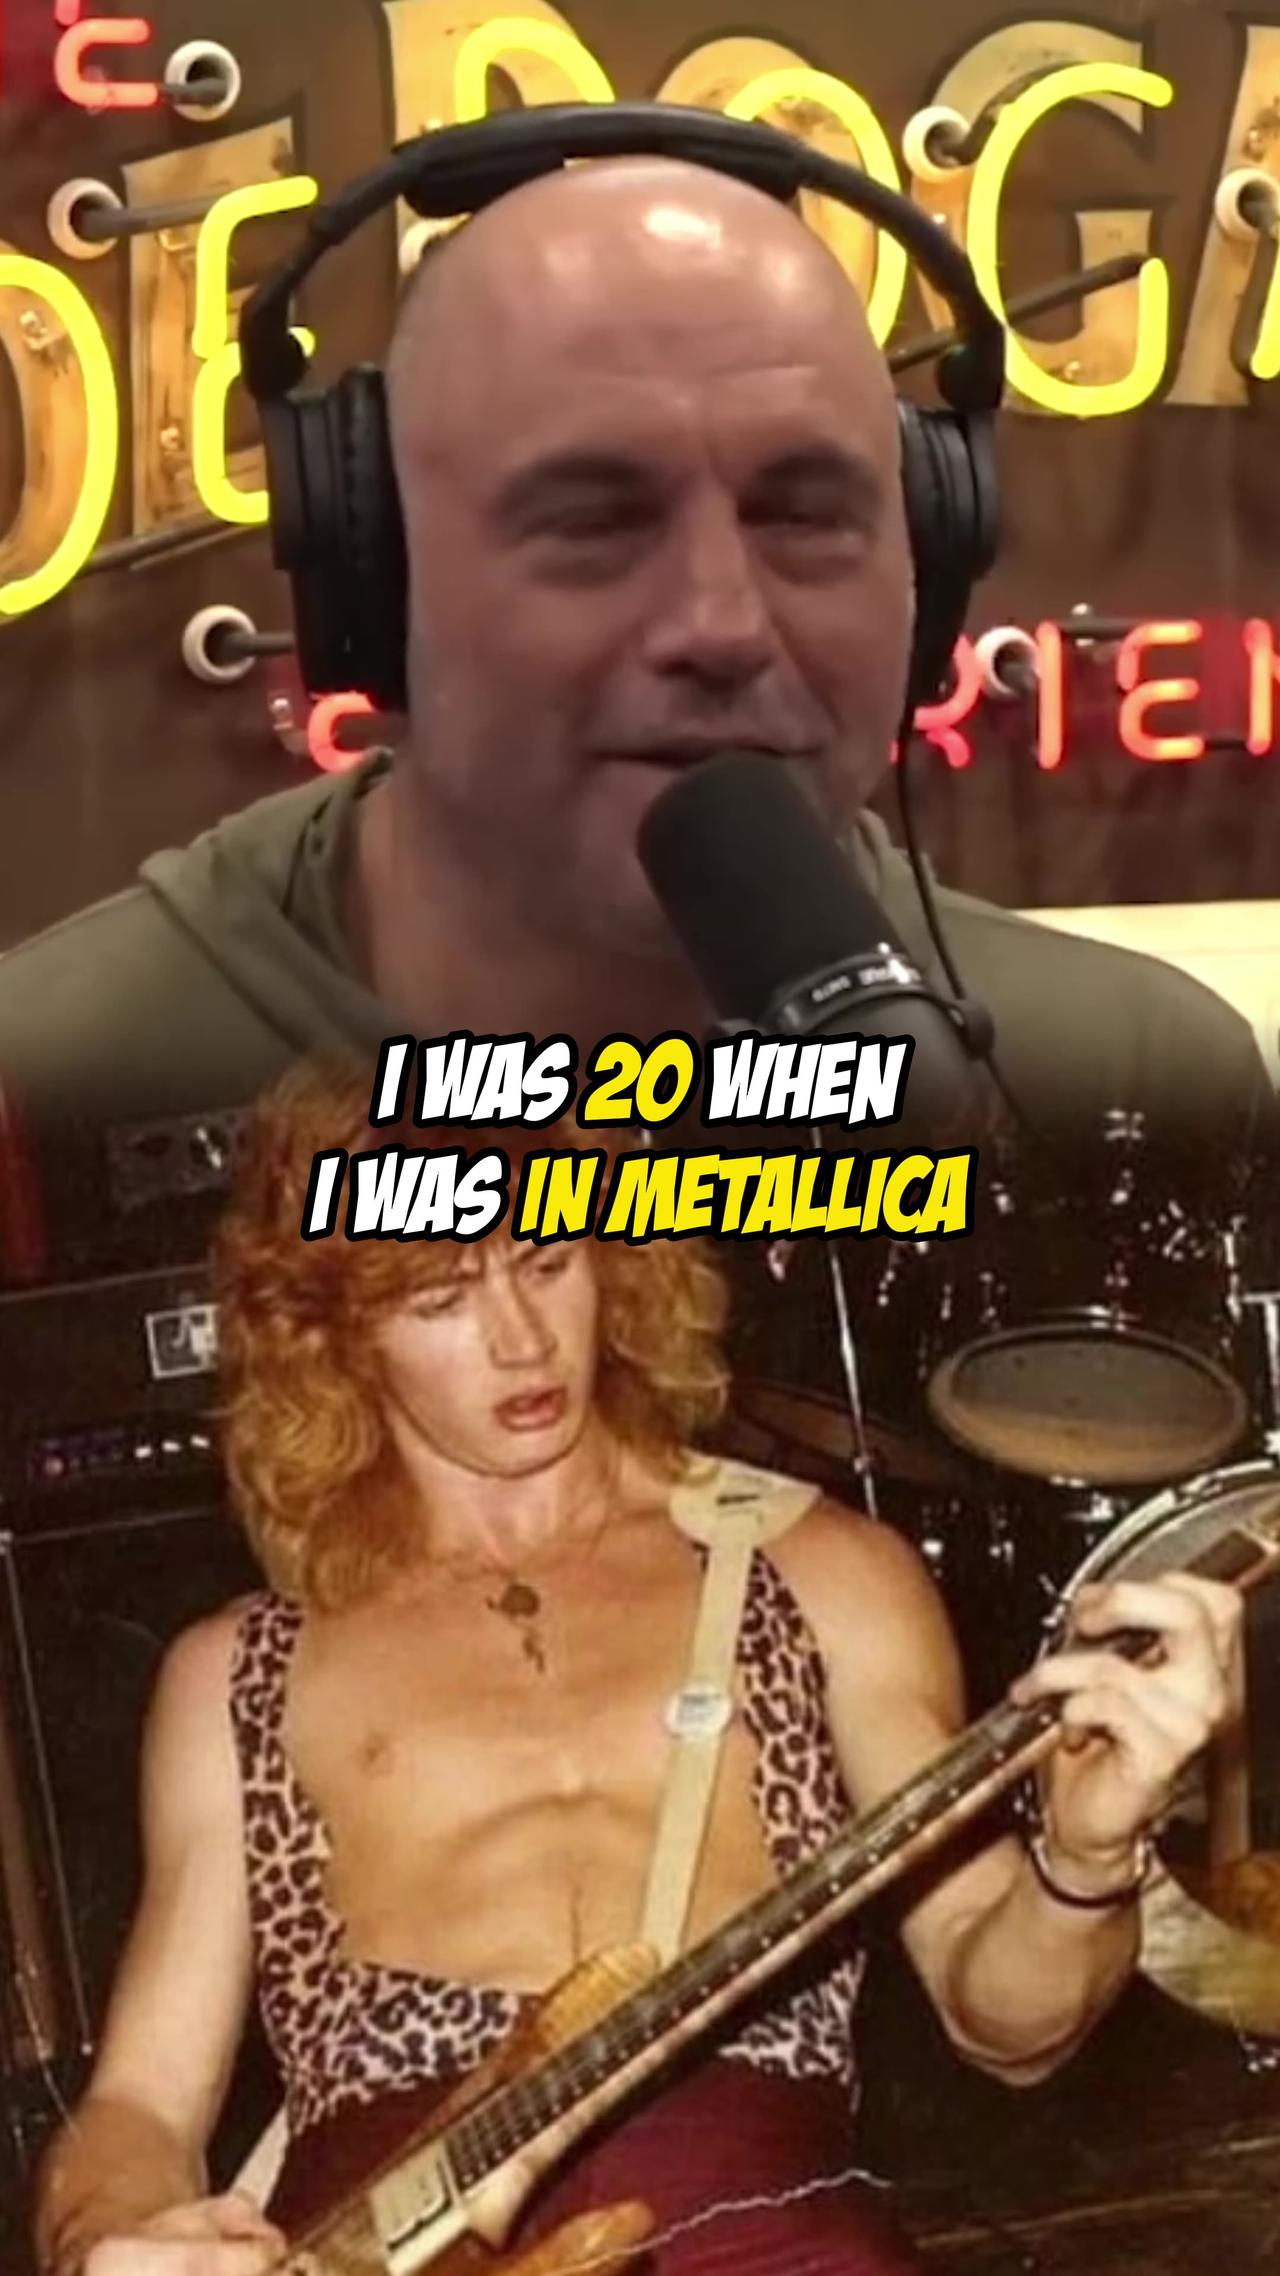 Dave Mustaine on Him Being 20 Years Old in Metallica